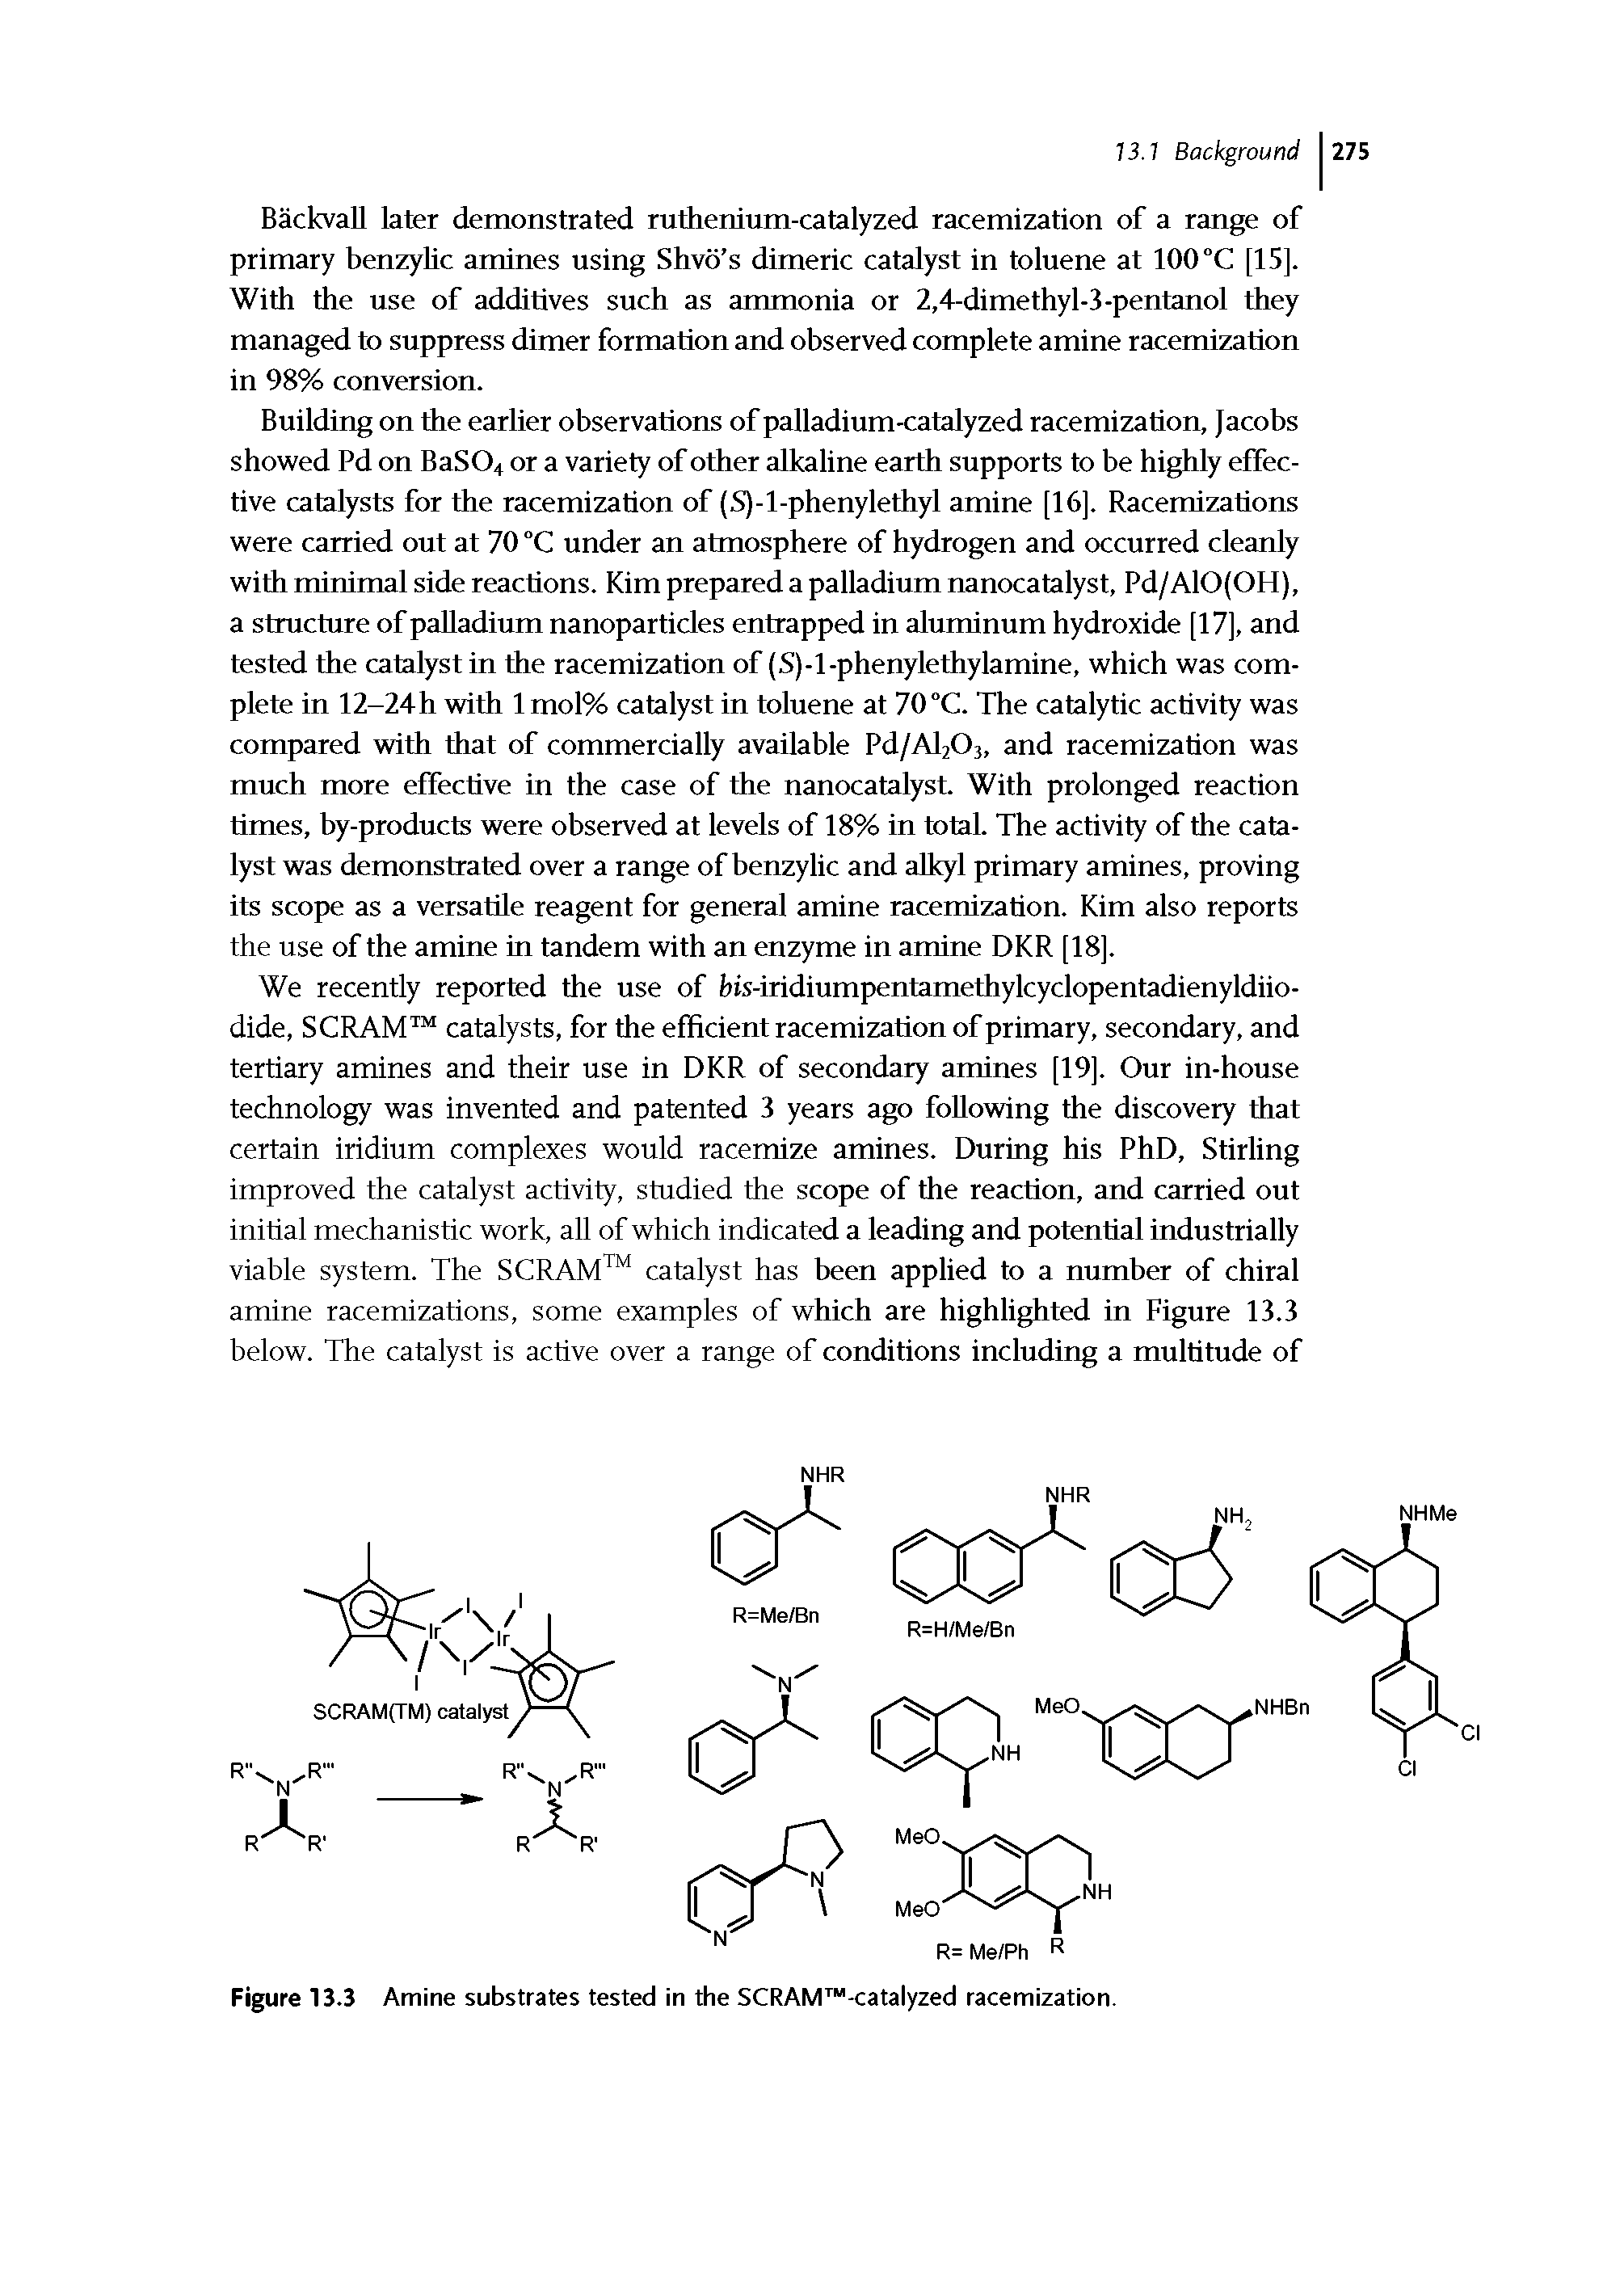 Figure 13.3 Amine substrates tested in the SCRAM -catalyzed racemization.